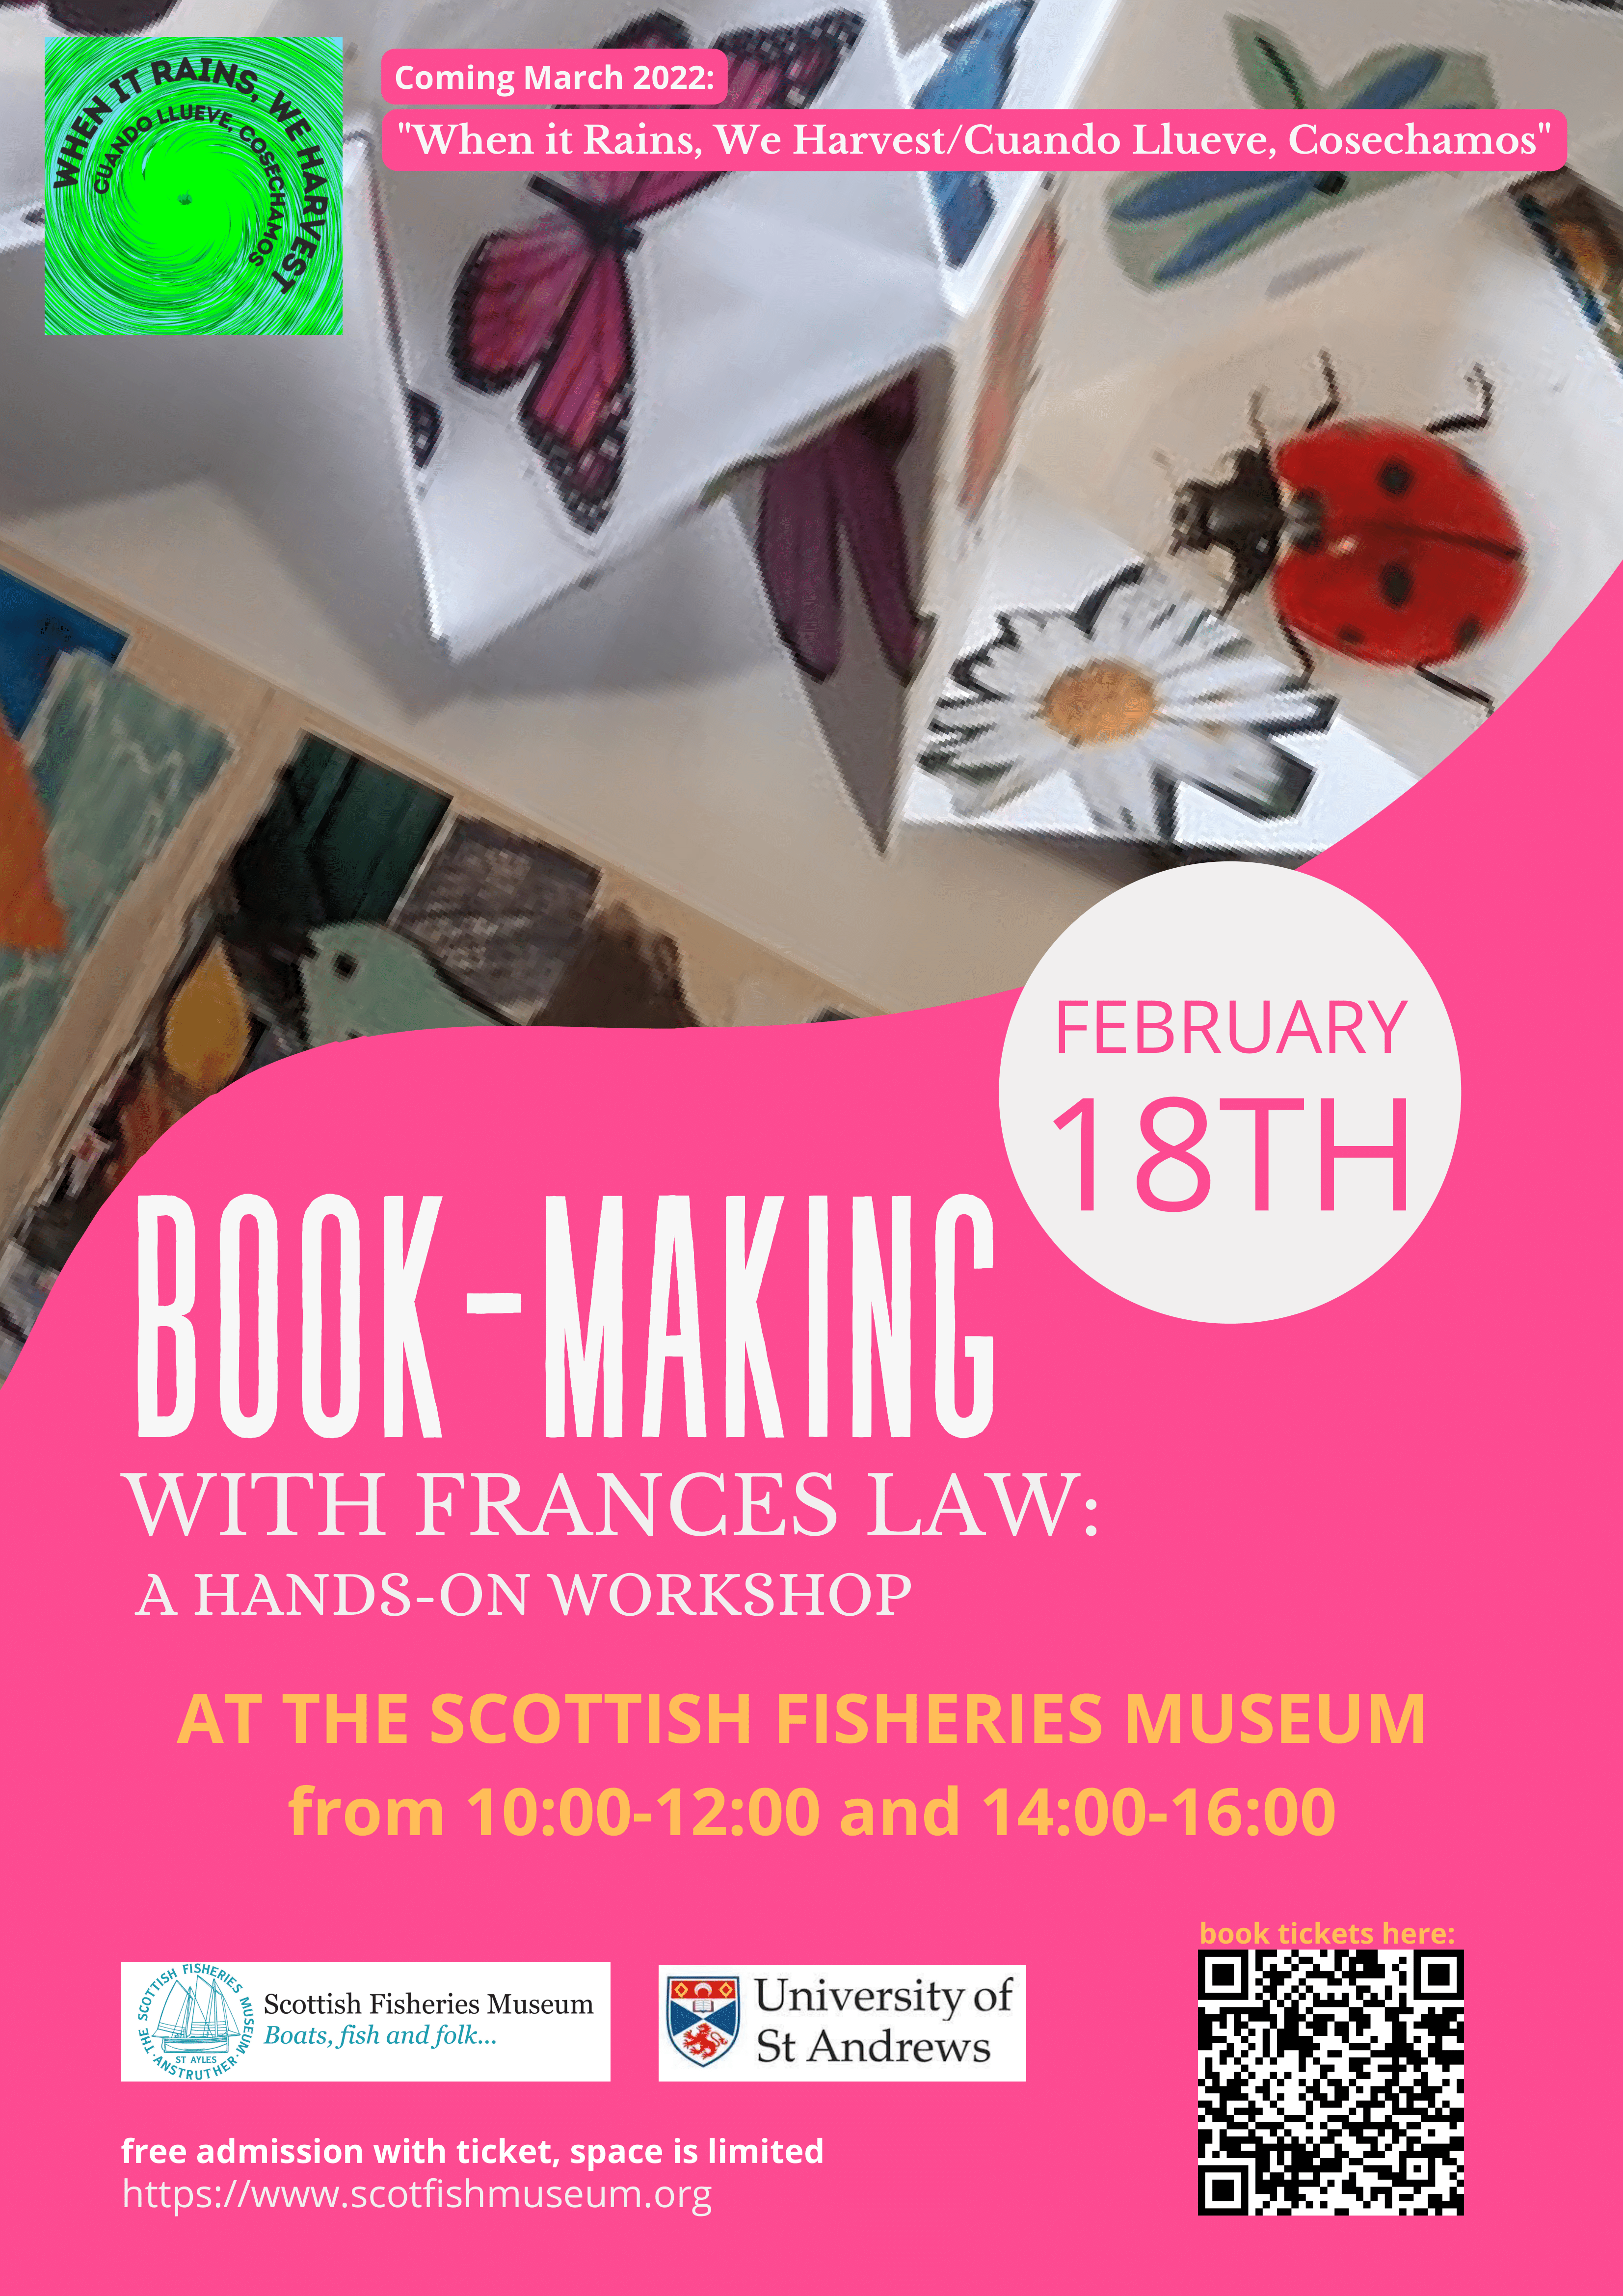 Book-making with Frances Law: A Hands-on Workshop